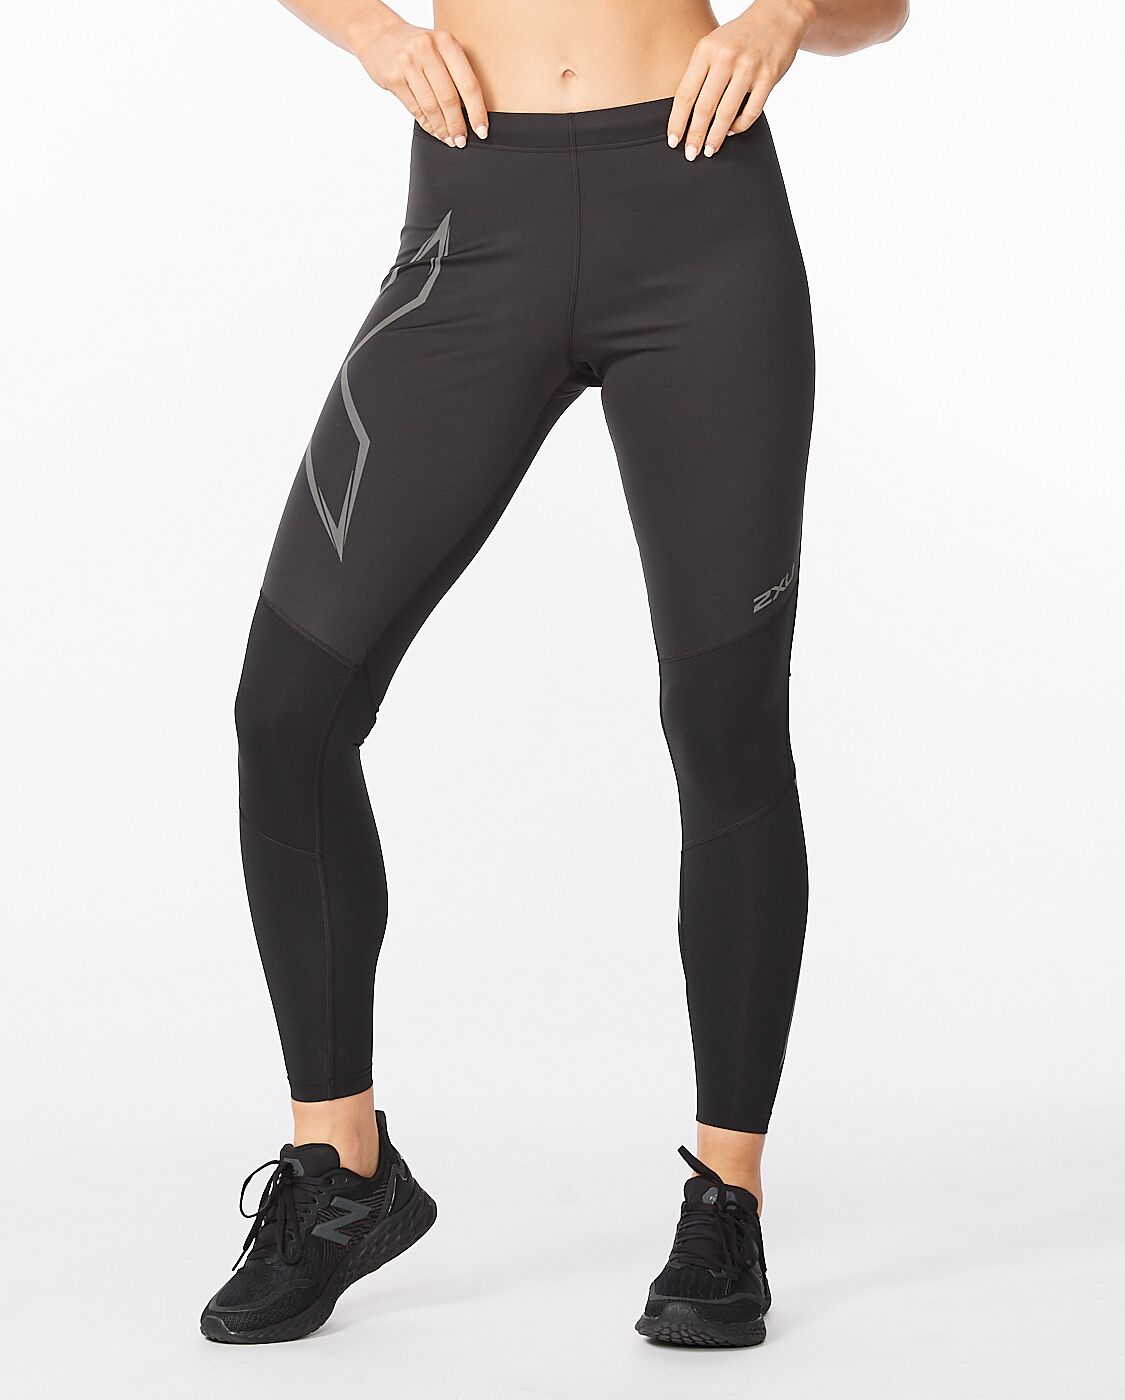 Motion Mid-Rise Compression Tights, 59% OFF